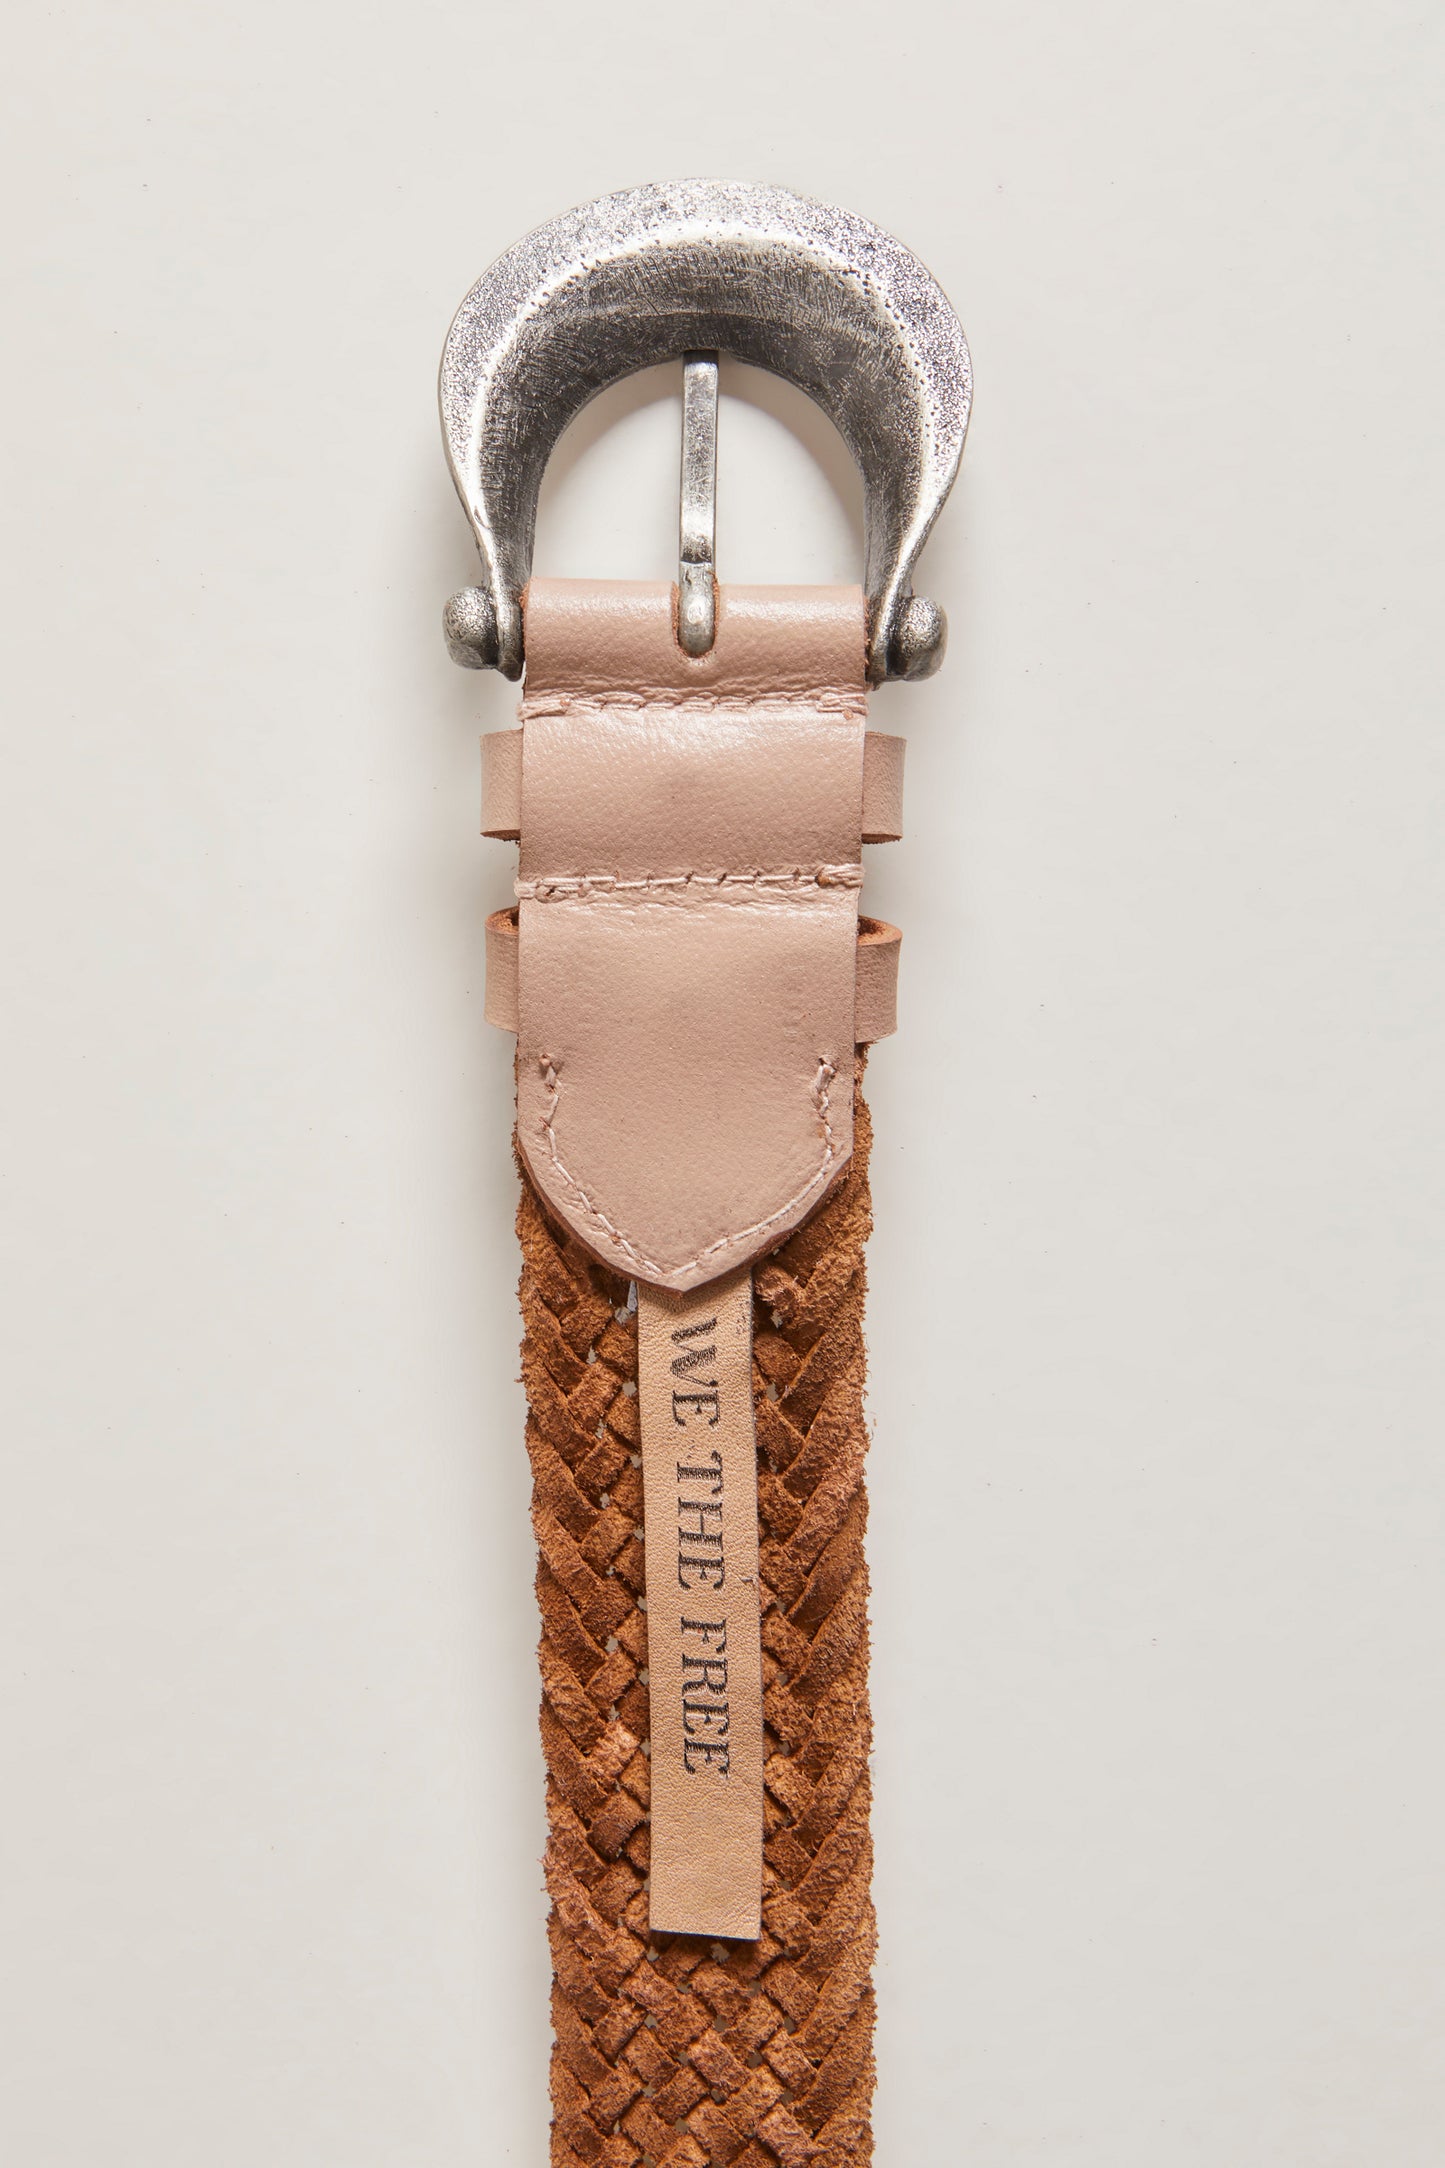 Free People Brix Belt in the color Oyster Mauve